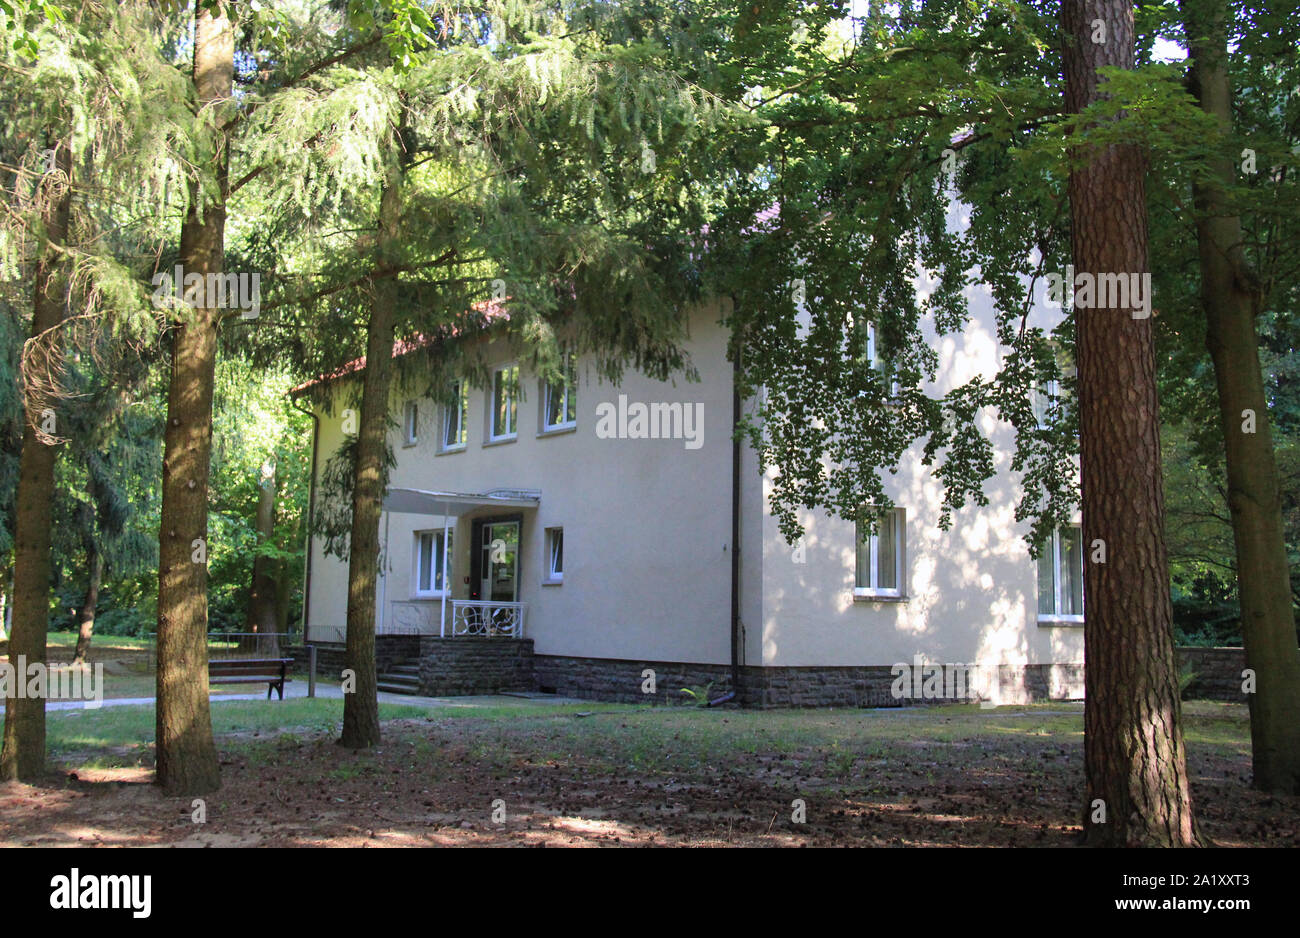 Berlin, Germany. 22nd Aug, 2019. Erich Honecker's house in Wandlitz area near Berlin, Germany, is seen on August 22, 2019. Honecker was a German communist politician who was the General Secretary of the Socialist Unity Party of Germany (SED). Credit: Martin Weiser/CTK Photo/Alamy Live News Stock Photo